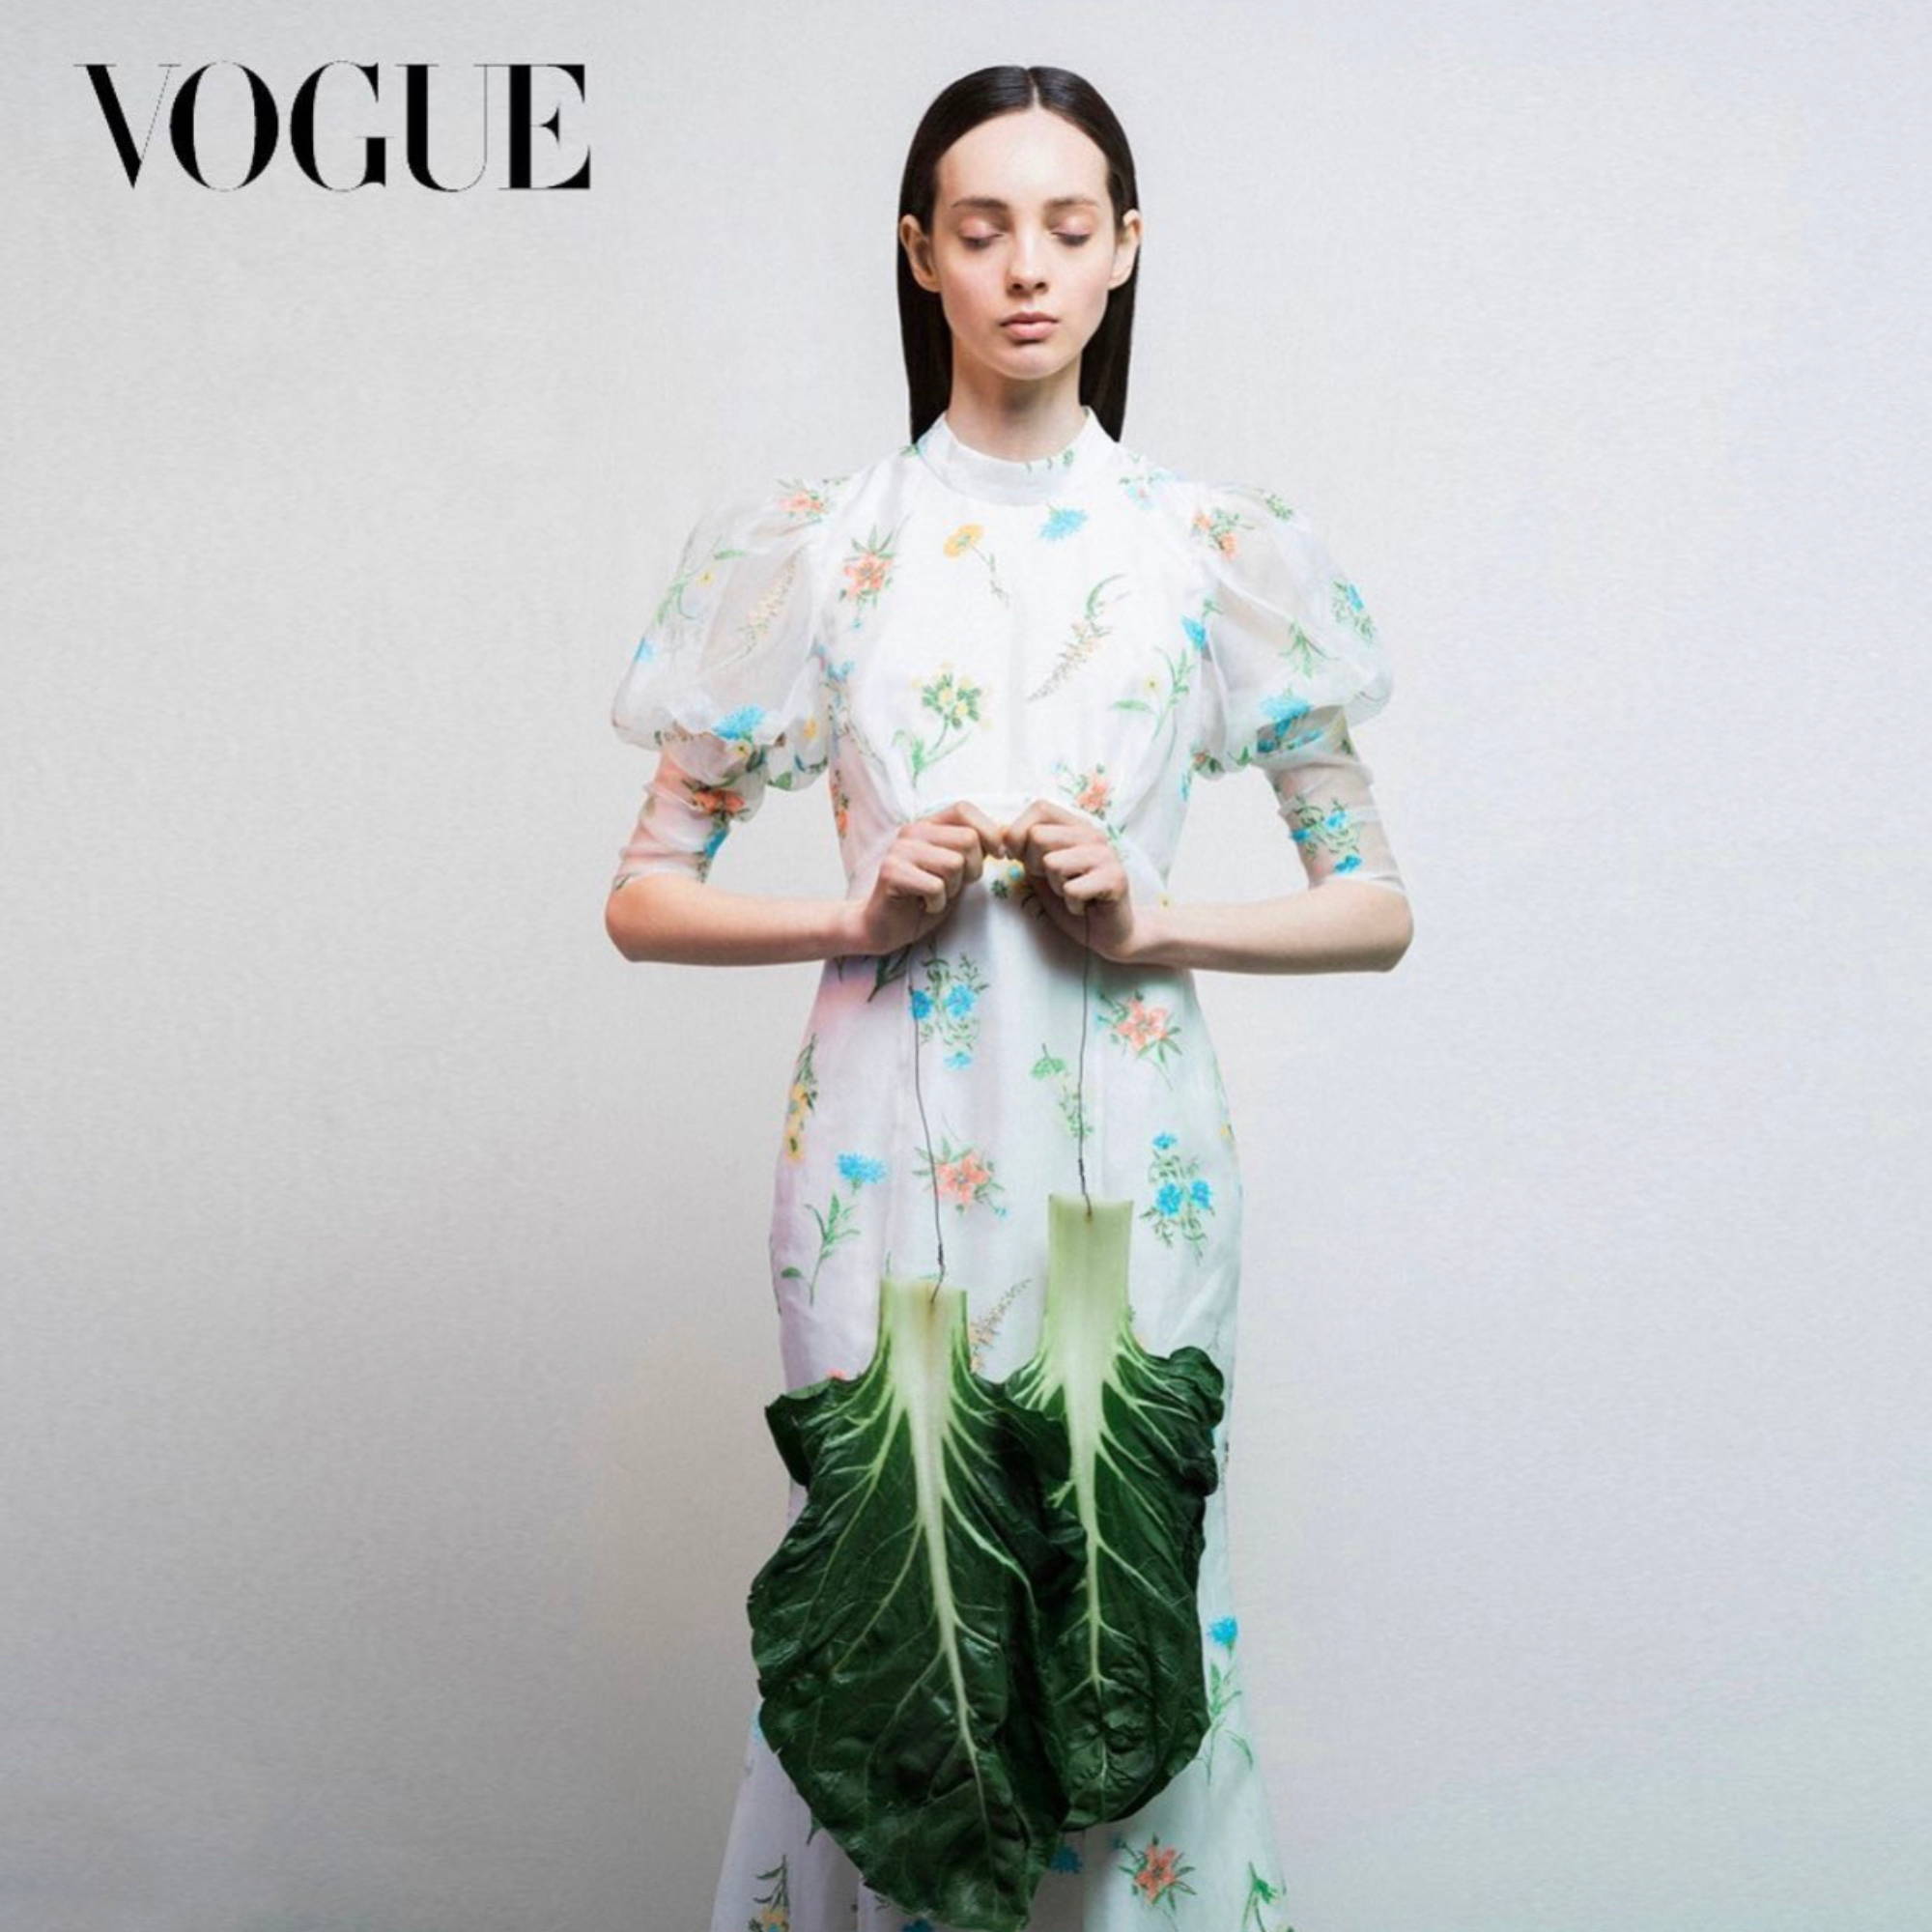 vogue italia the photo shoot that started it all with the botanical hair care line 